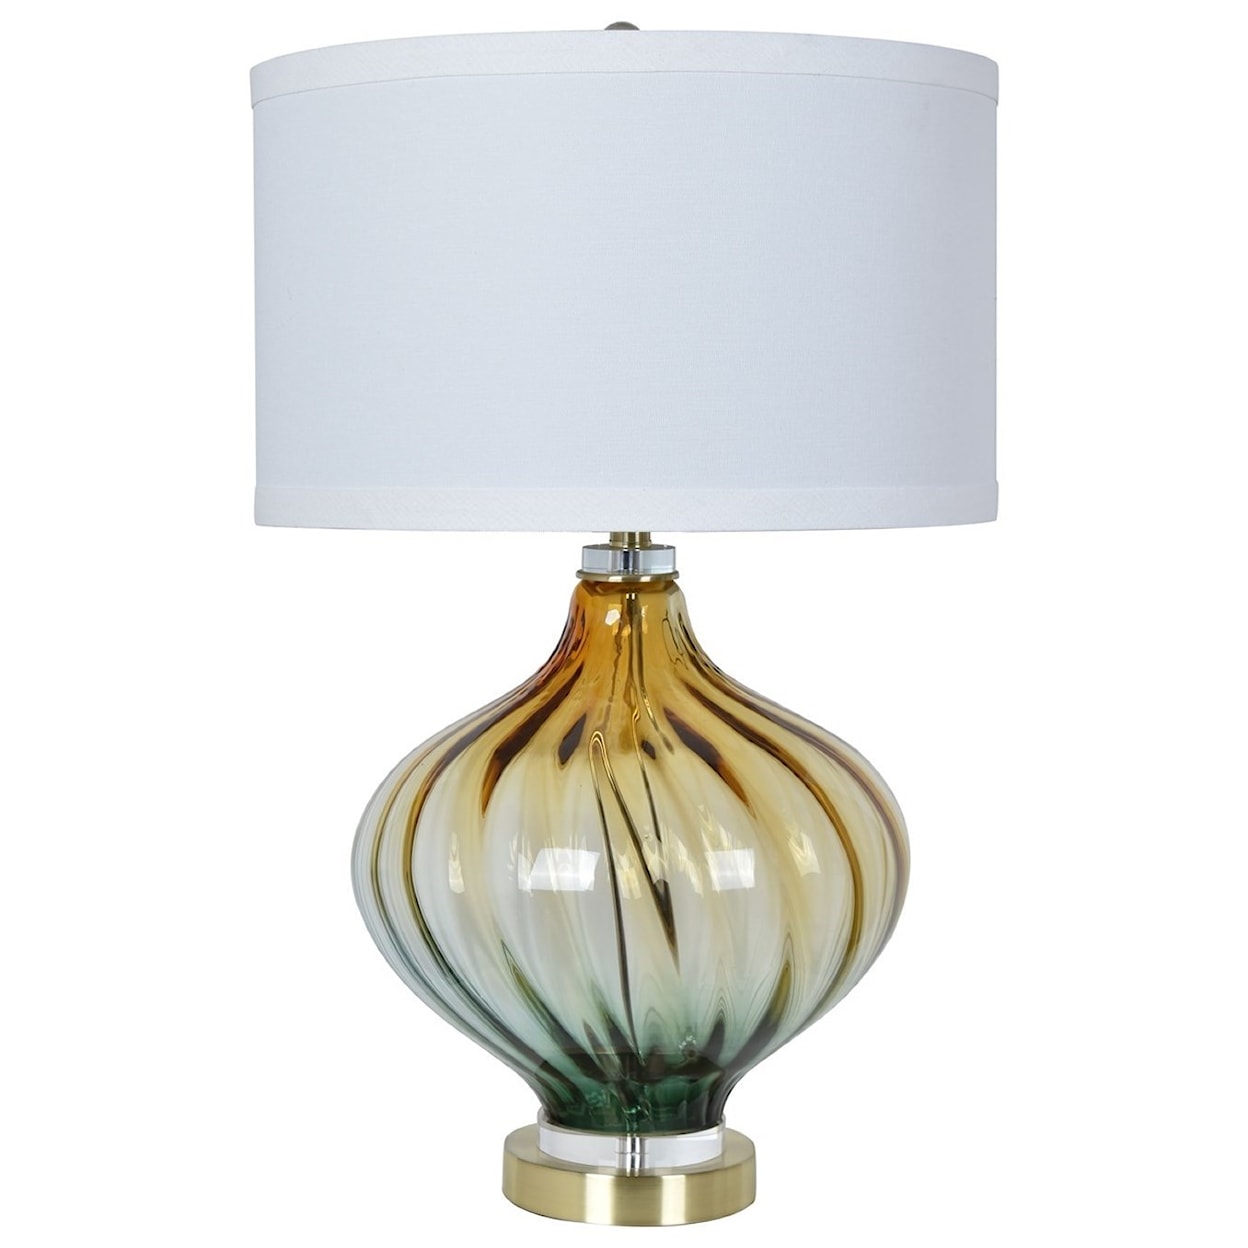 Crestview Collection Lighting Amelia Table Lamp